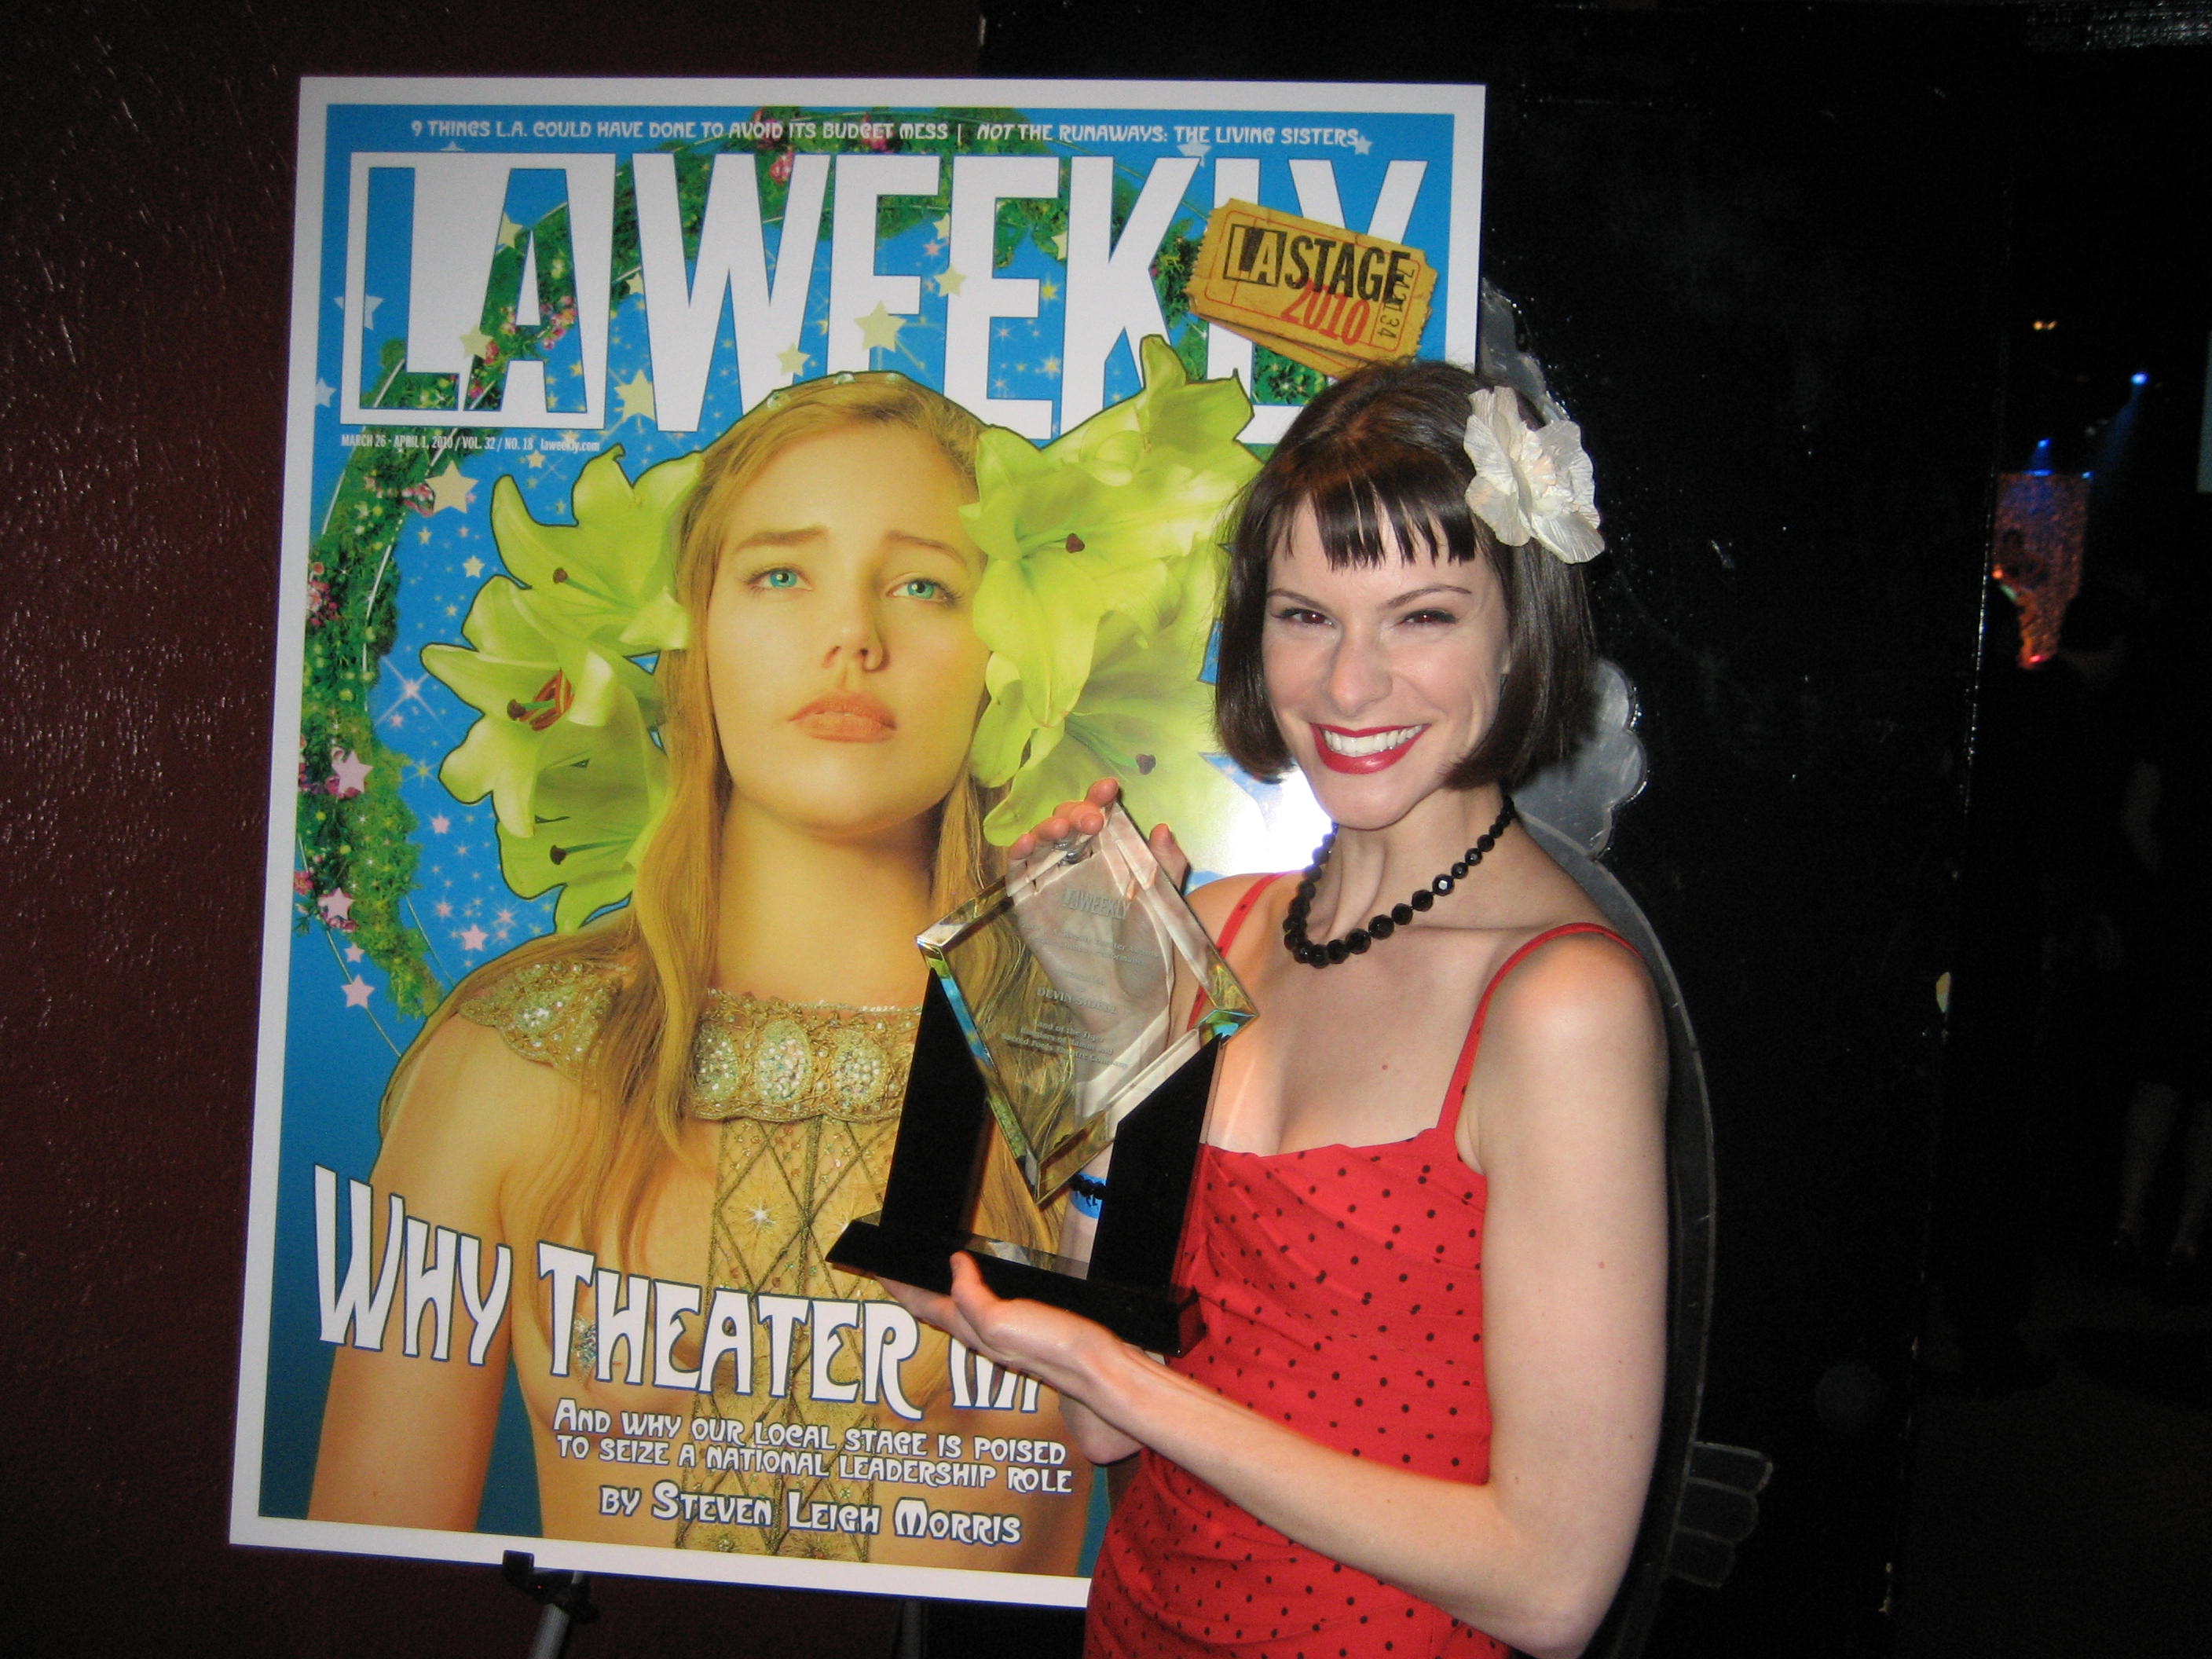 L.A. Weekly Awards March 29, 2010